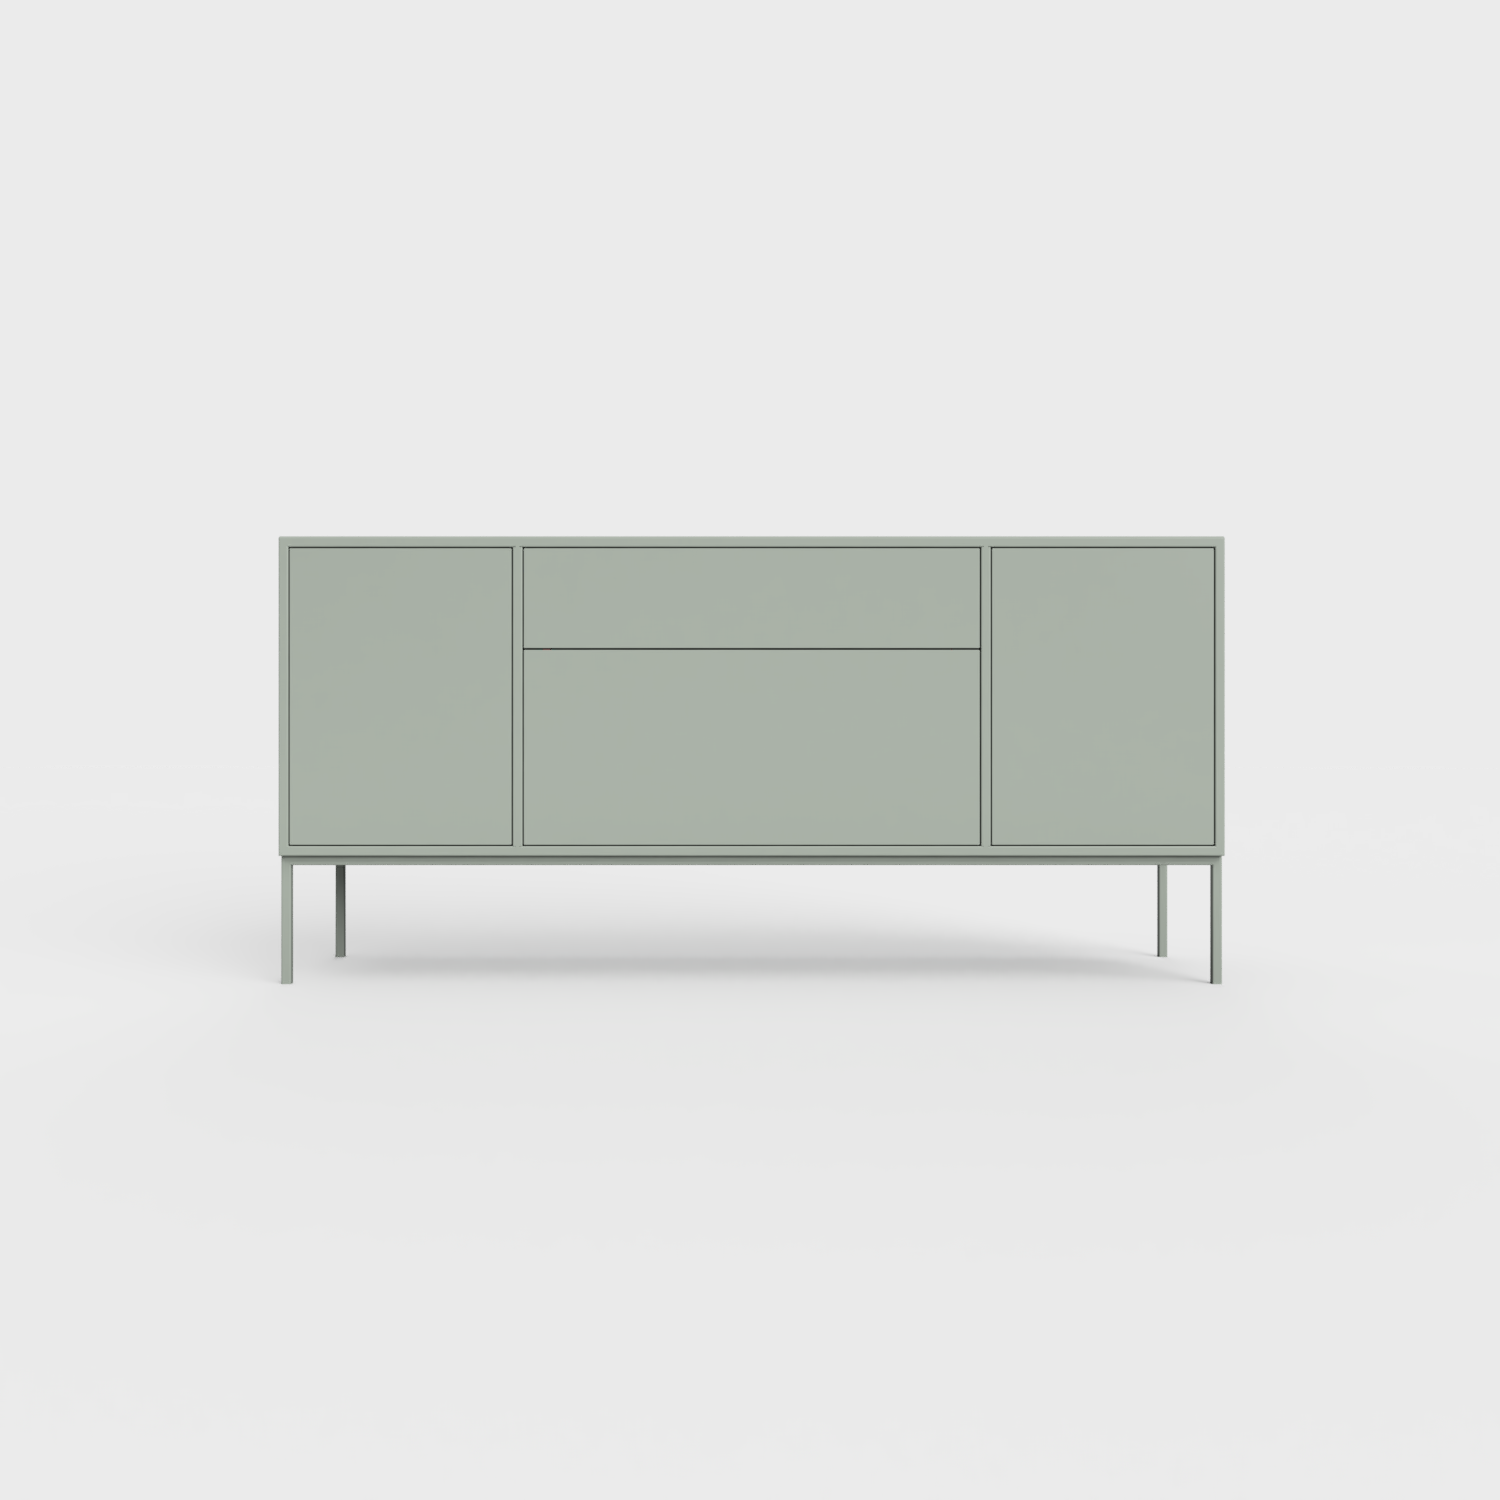 Arnika 02 Sideboard in Dark Matcha Green color, powder-coated steel, elegant and modern piece of furniture for your living room